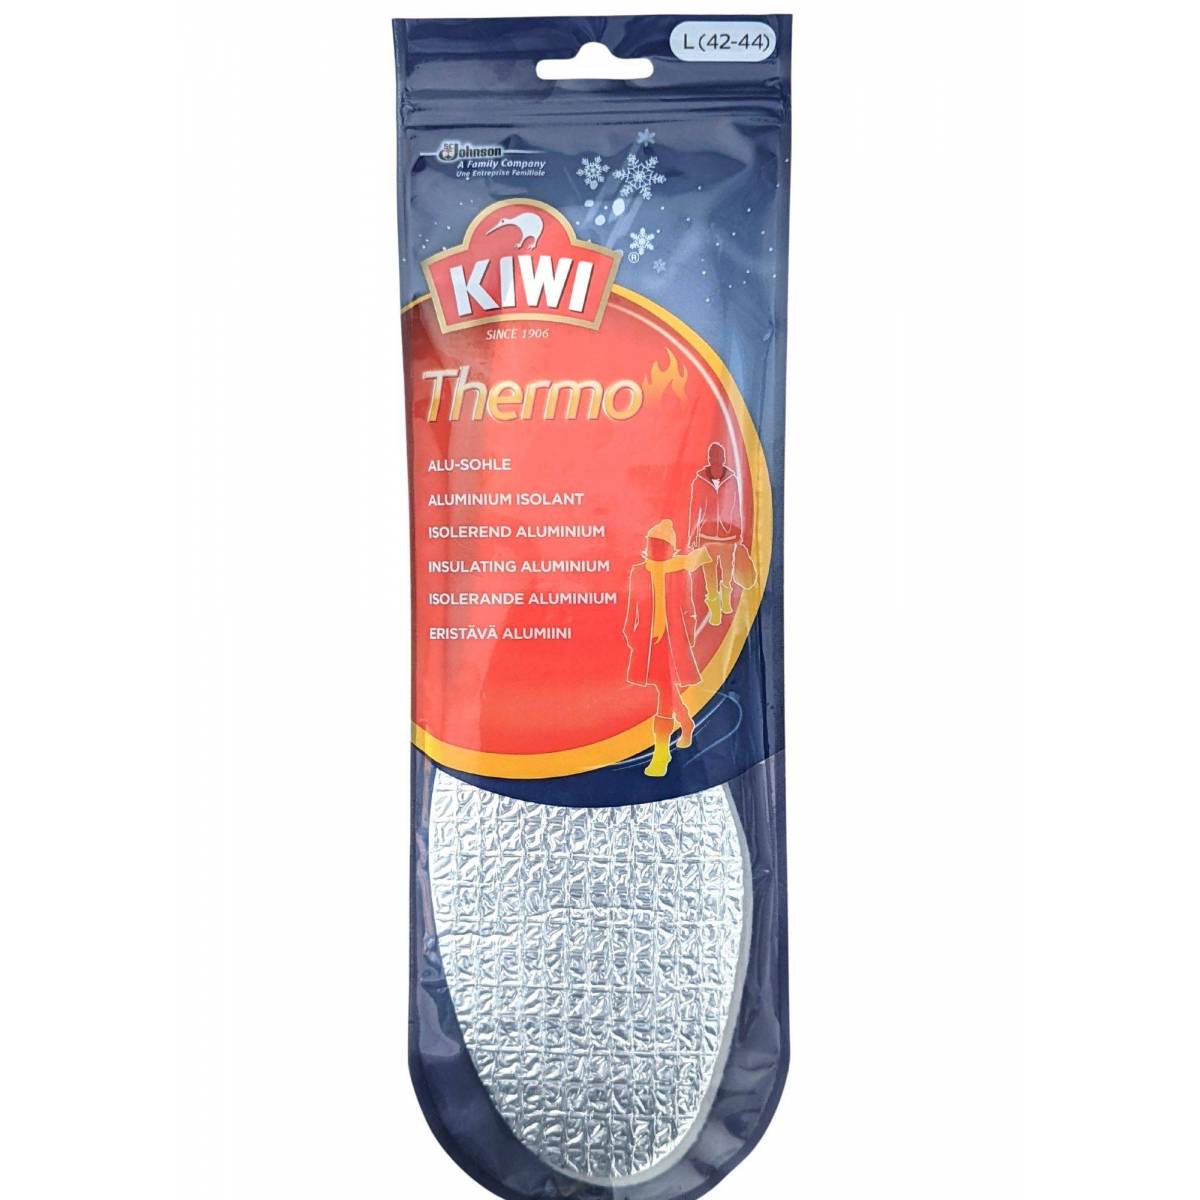 Pair of Kiwi Thermo Insulating Aluminum Soles Size L 42-44